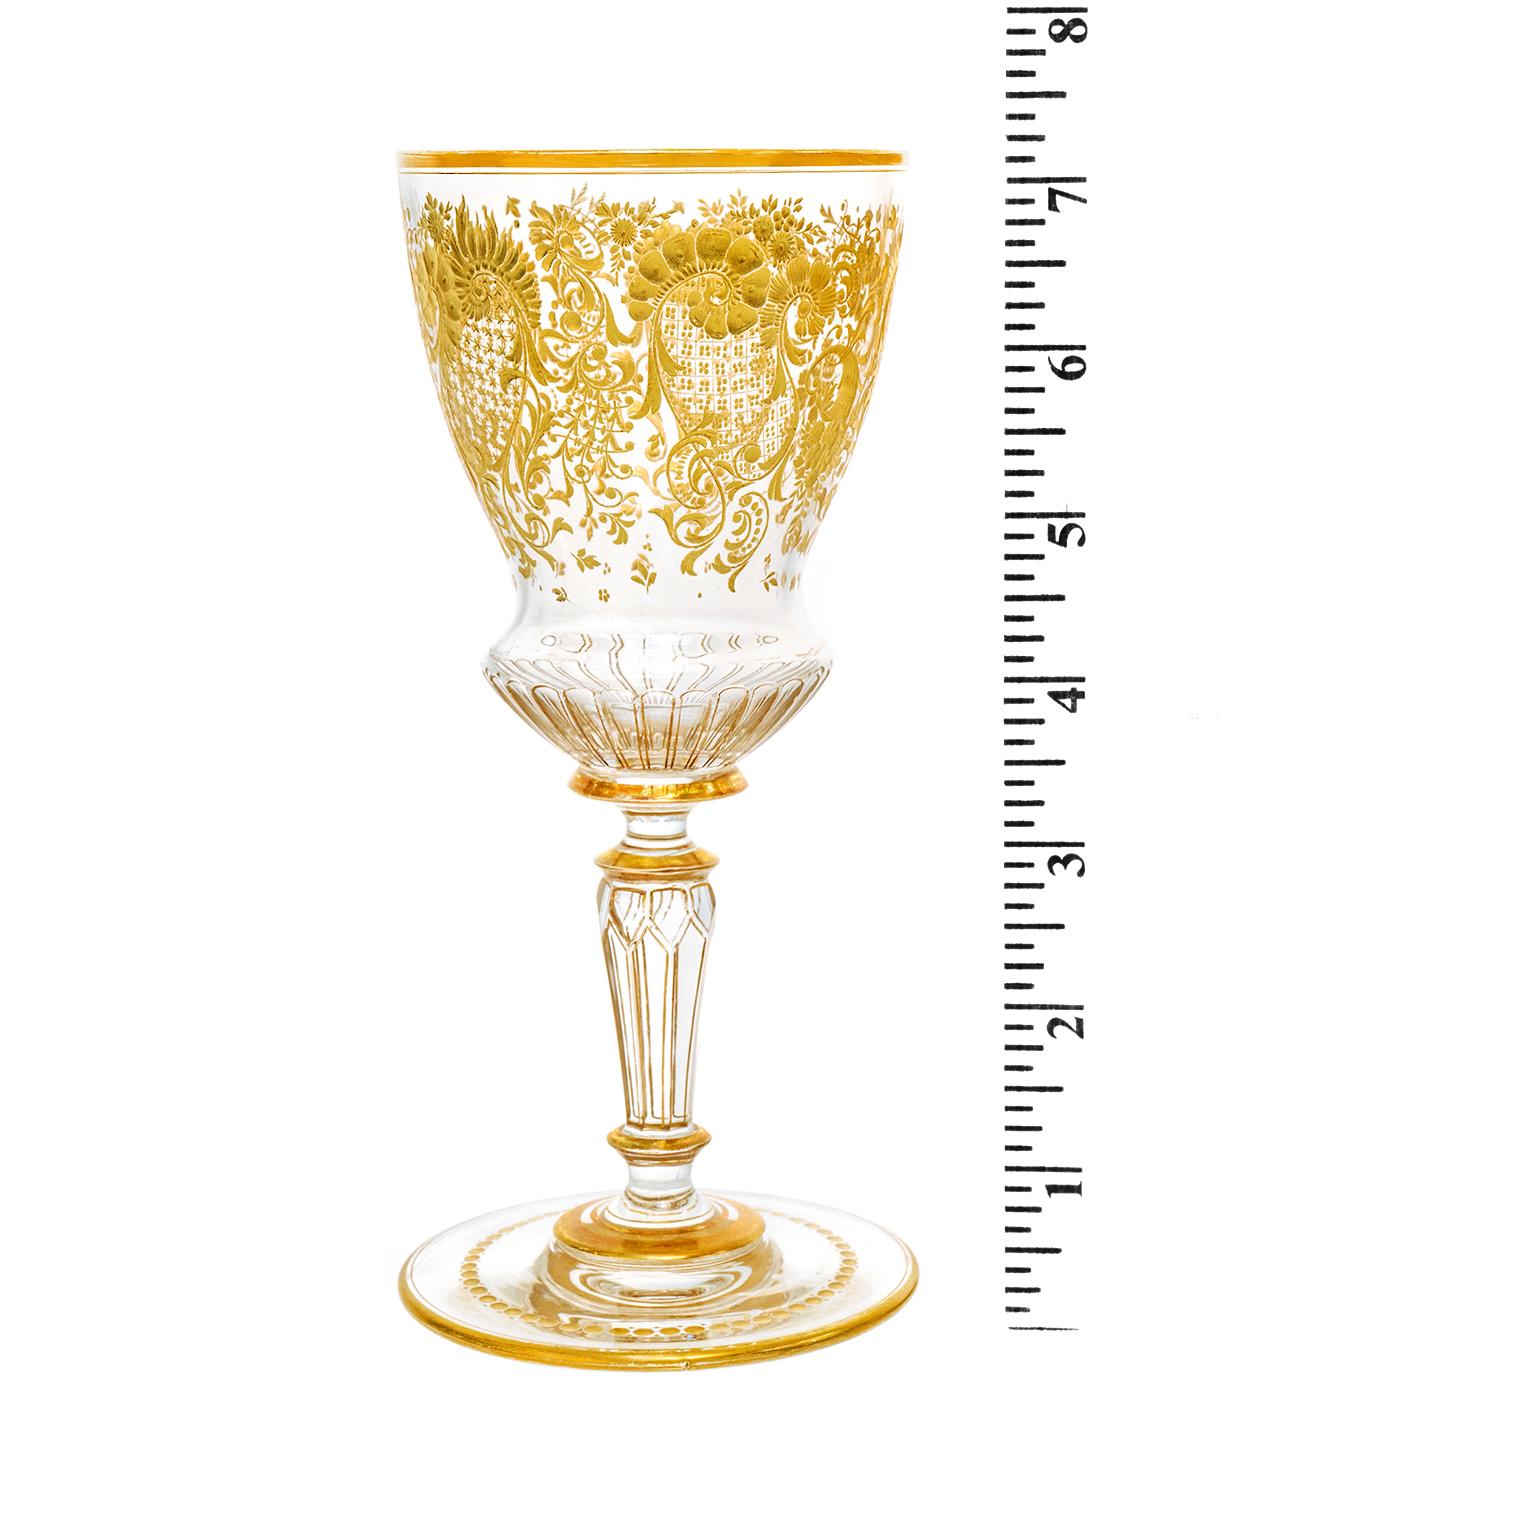 Moser Water Goblets Set of 10 Austria In Excellent Condition For Sale In Litchfield, CT